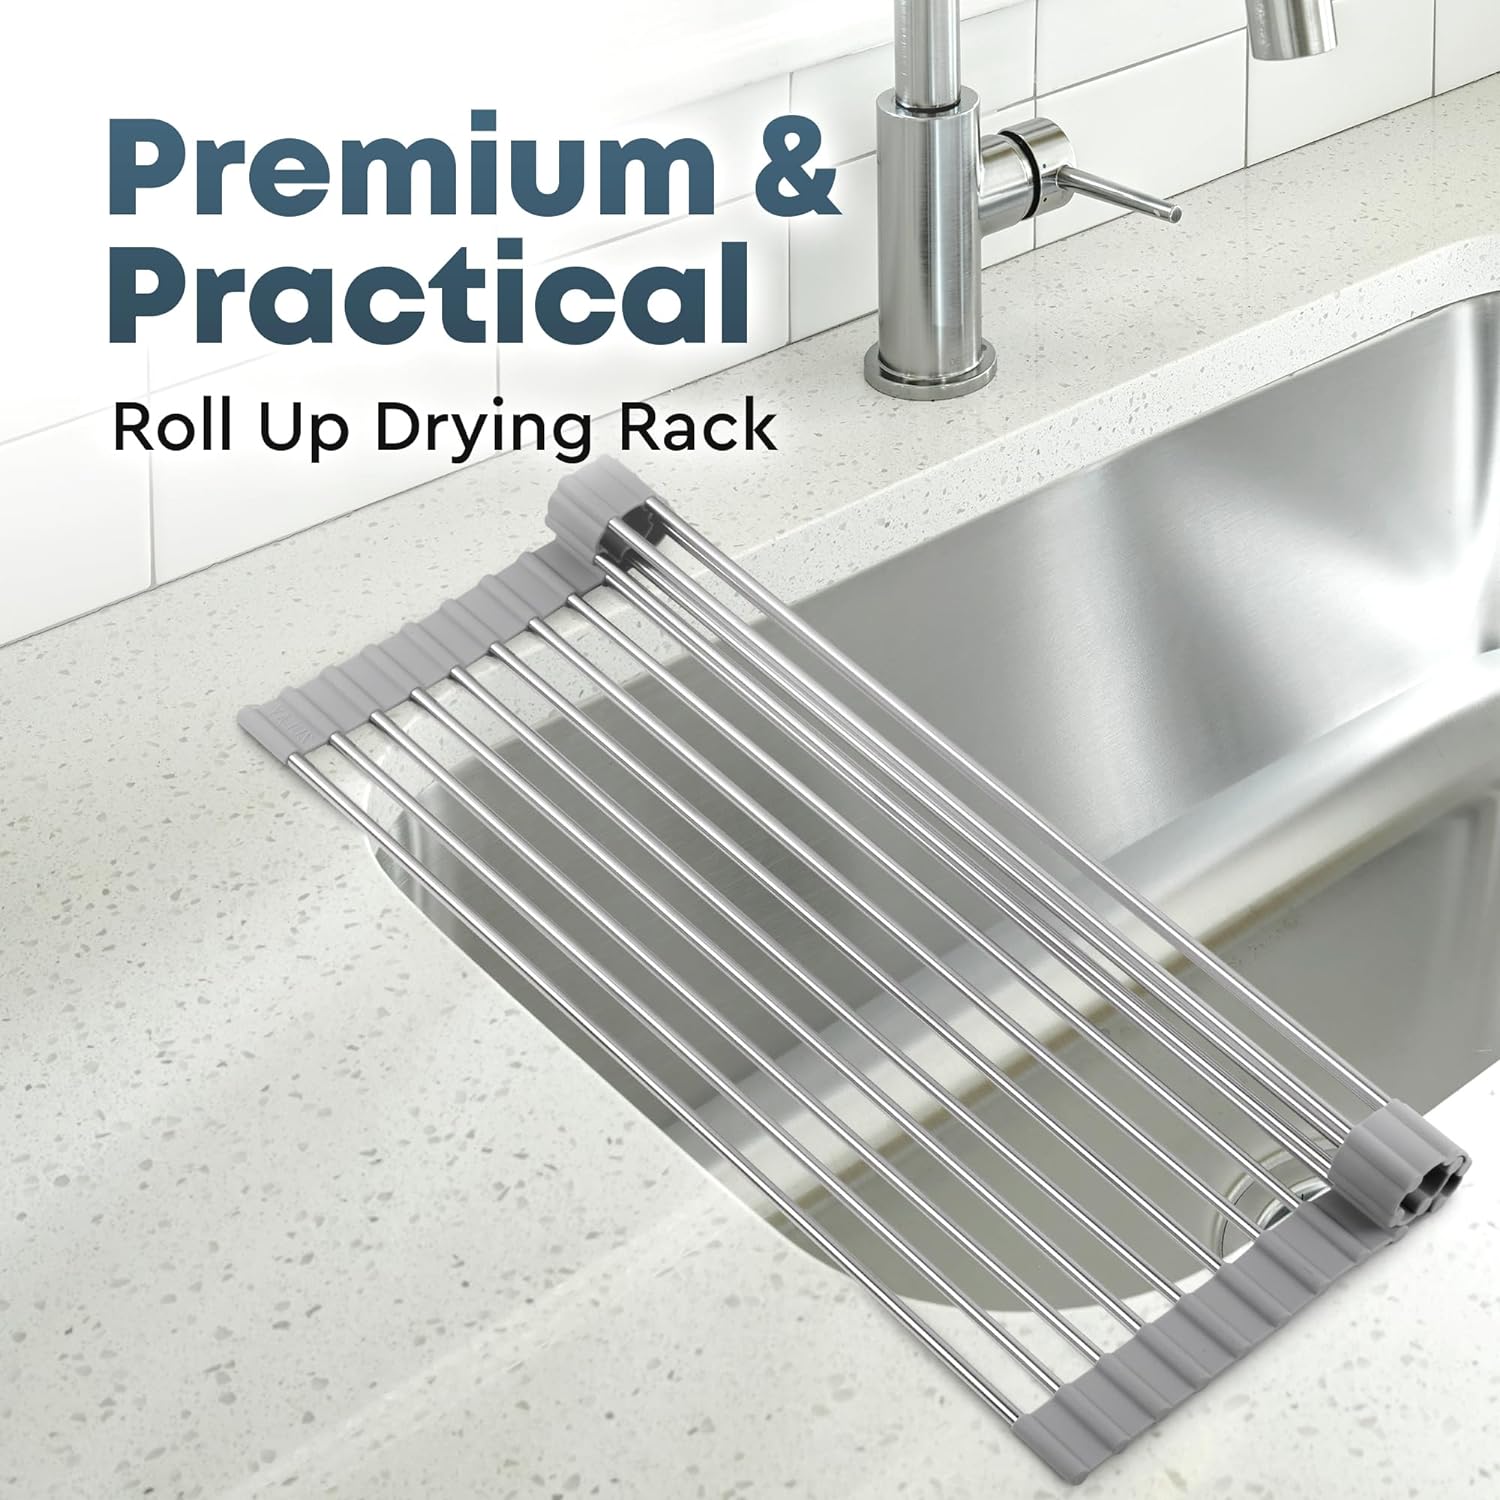 Over The Sink Dish Drying Rack, Roll Up Sink Dish Drainer Rack Multipurpose  Foldable Kitchen Stainless Steel Dish Rack Sink Drying Rack